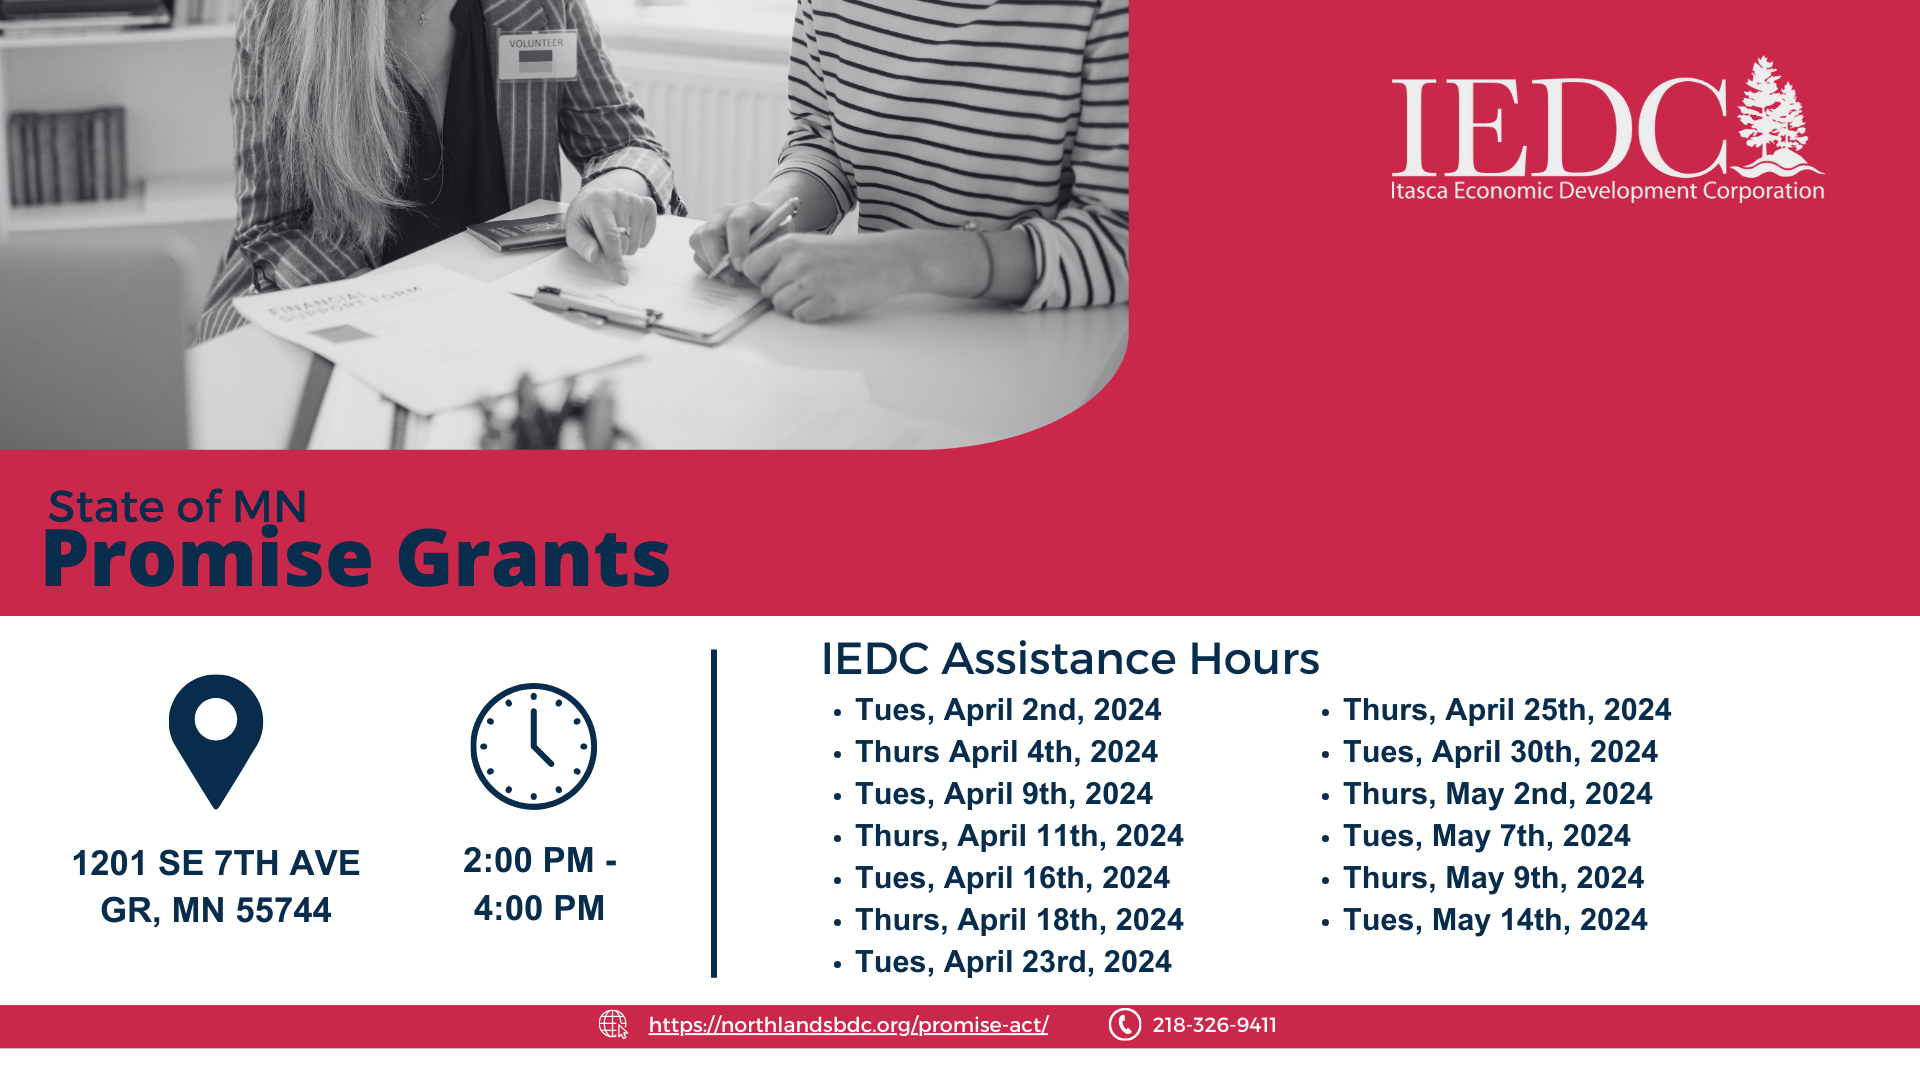 IEDC Promise Grant Assistance Hours Photo